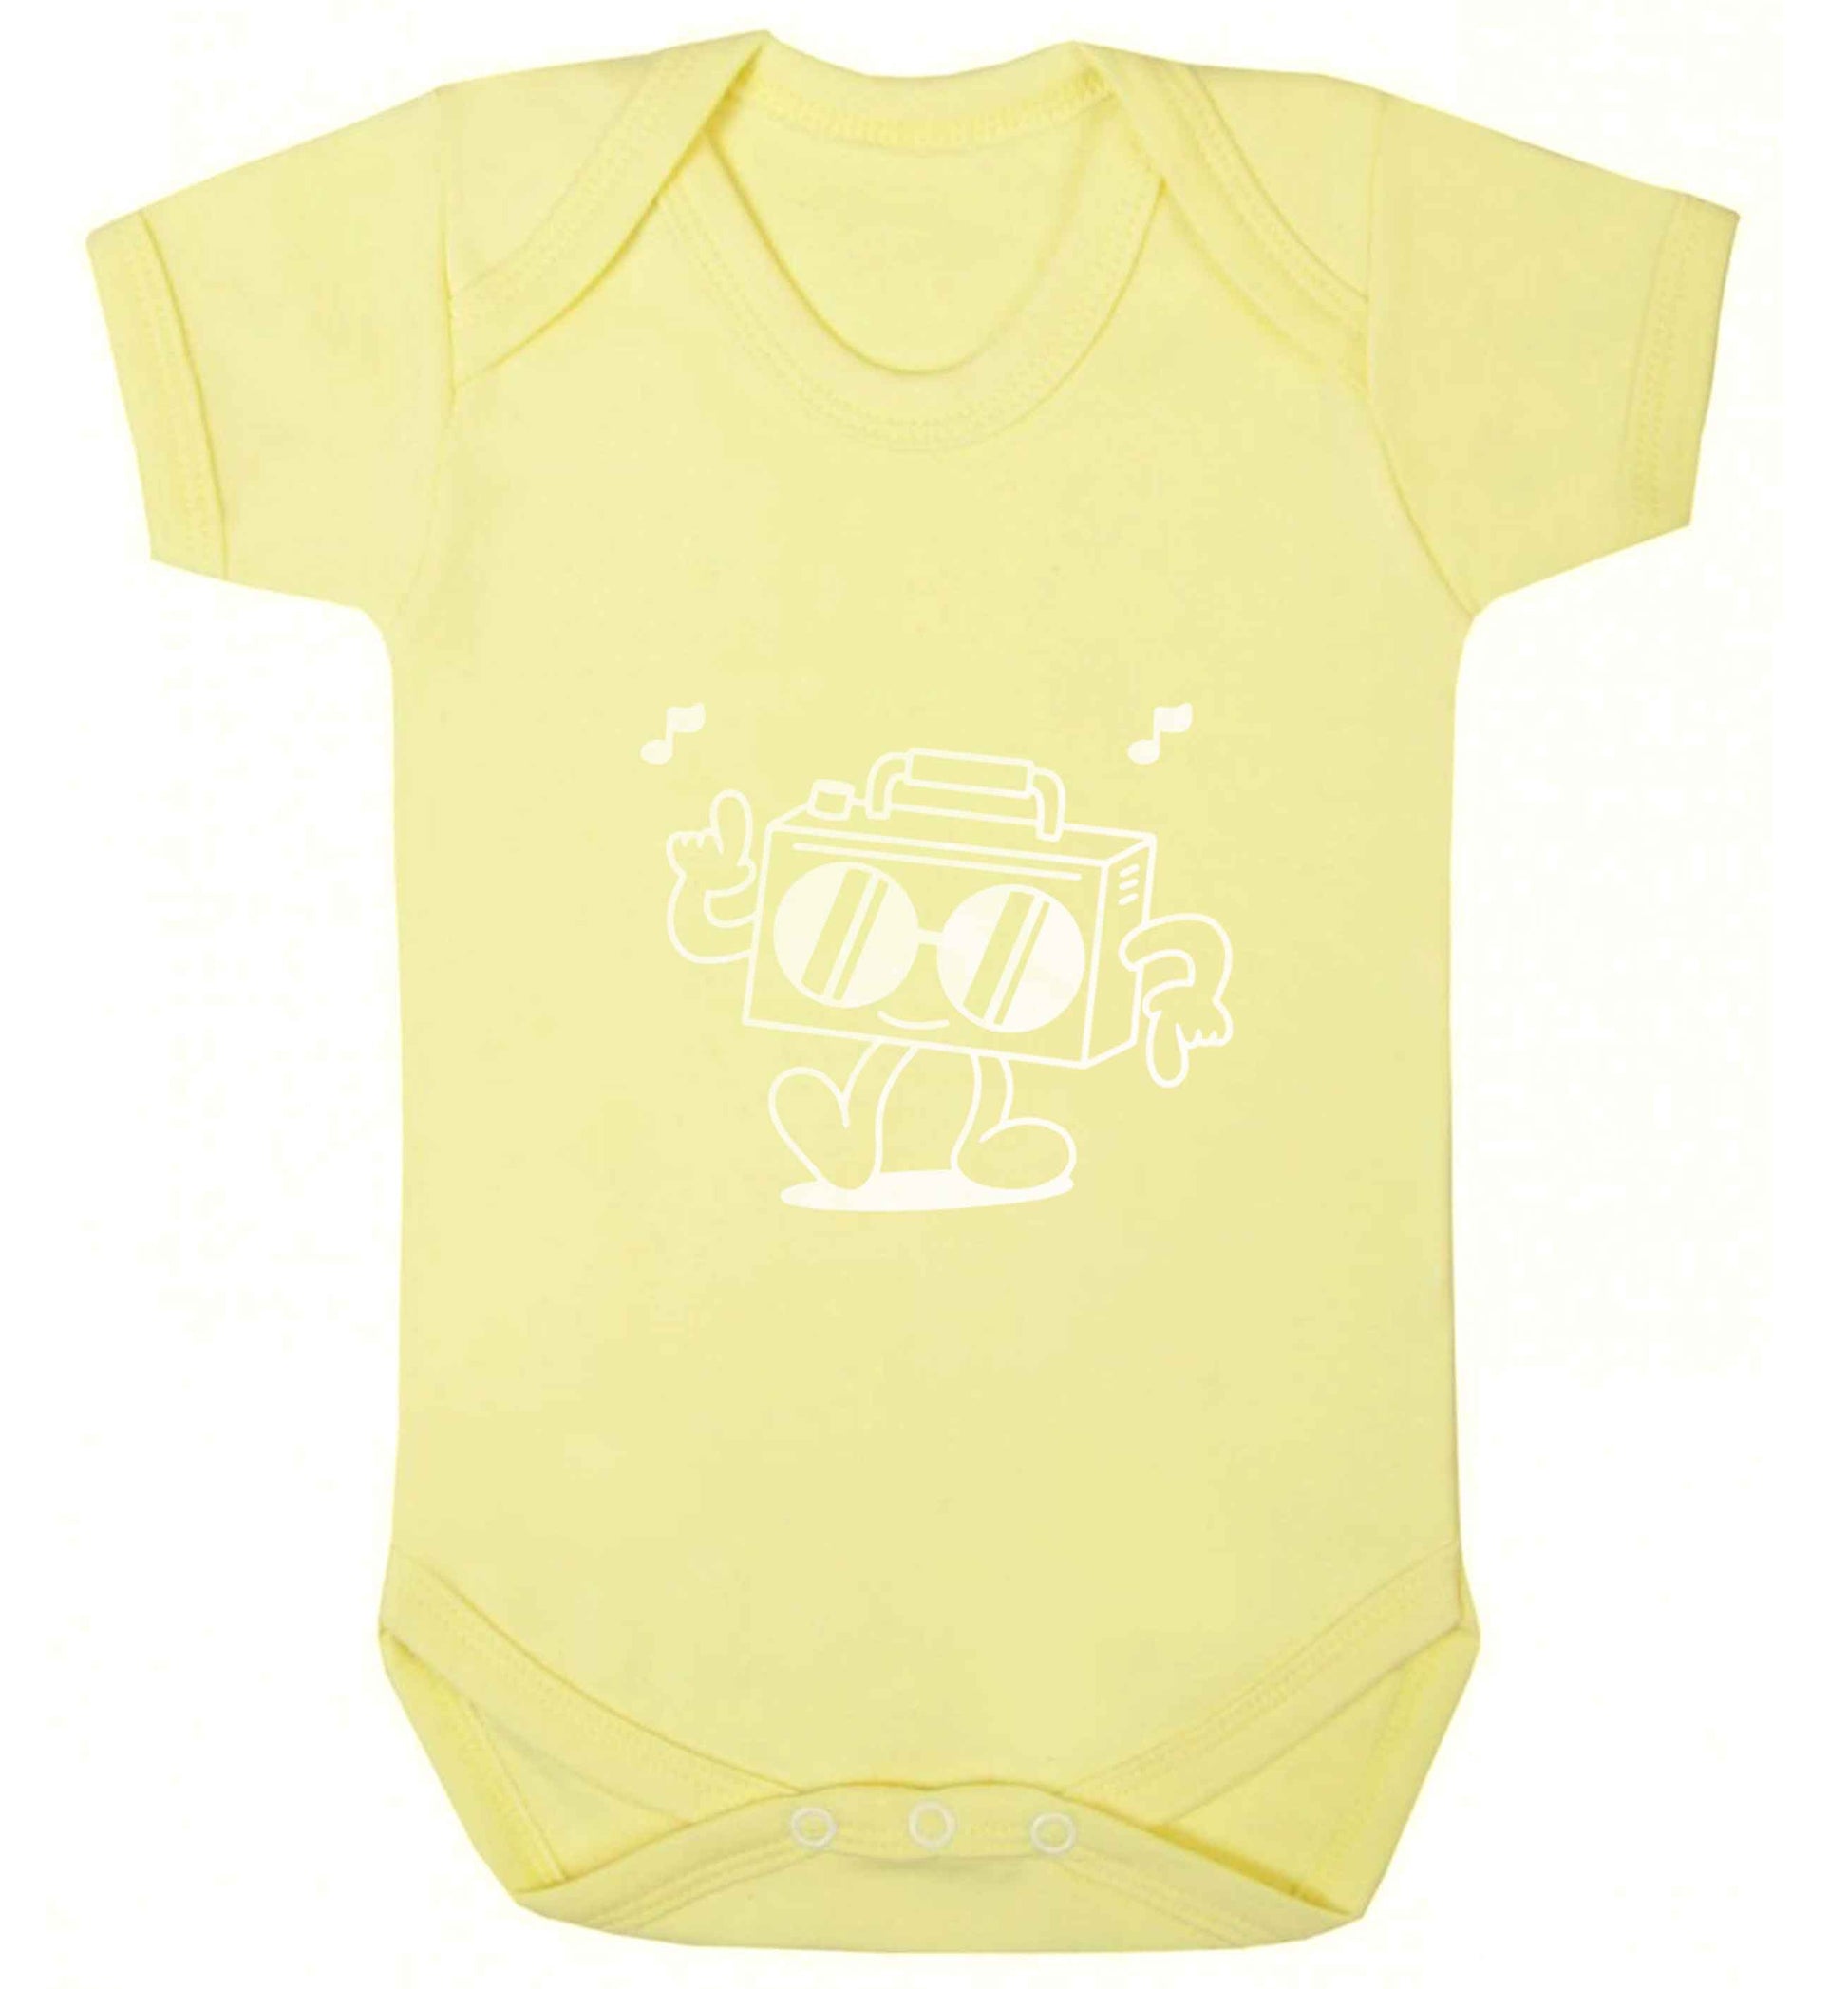 Boombox baby vest pale yellow 18-24 months